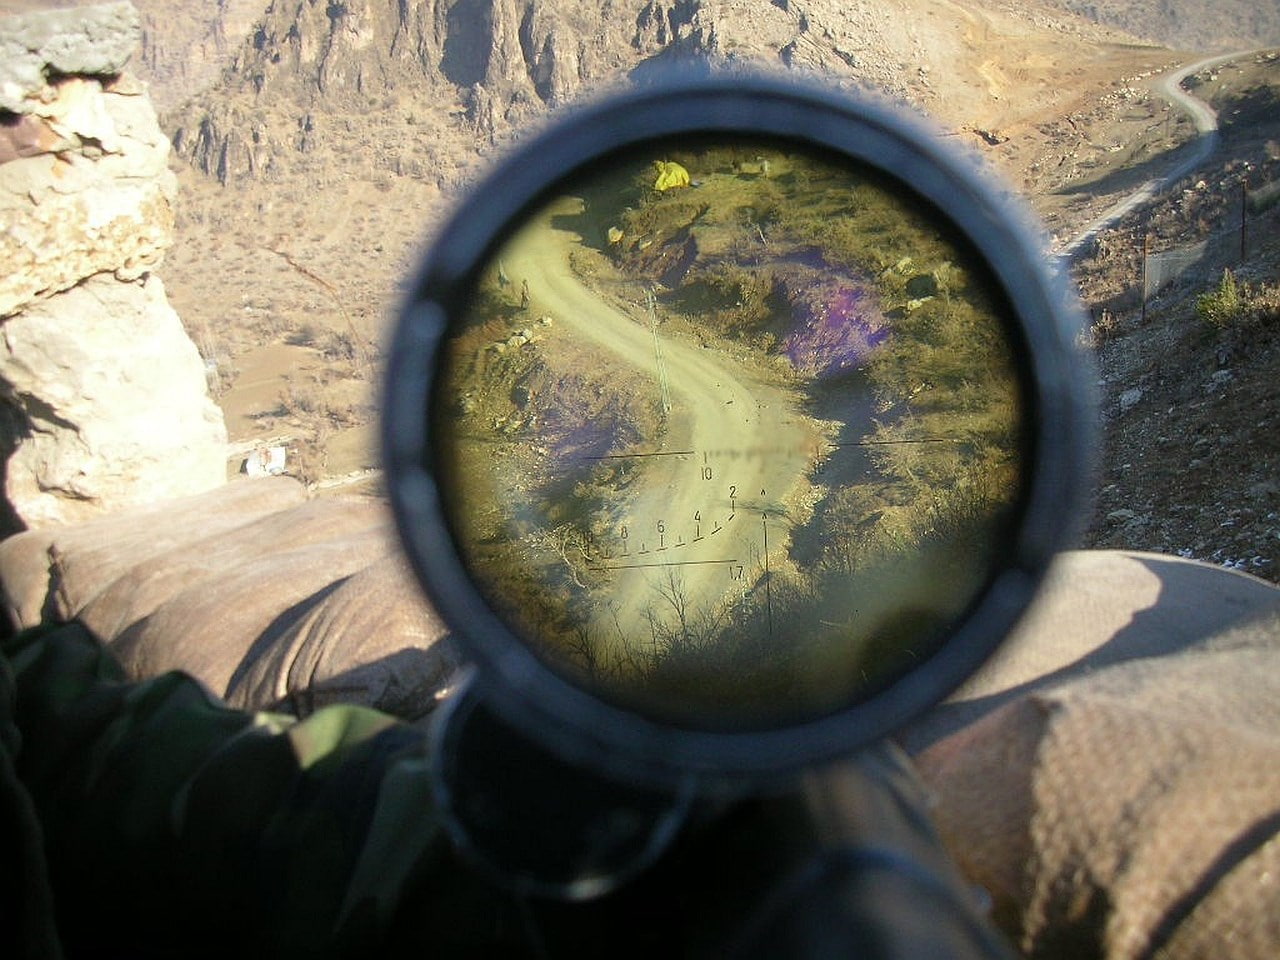 sniper rifle, reflection, nature, day, one person, glasses